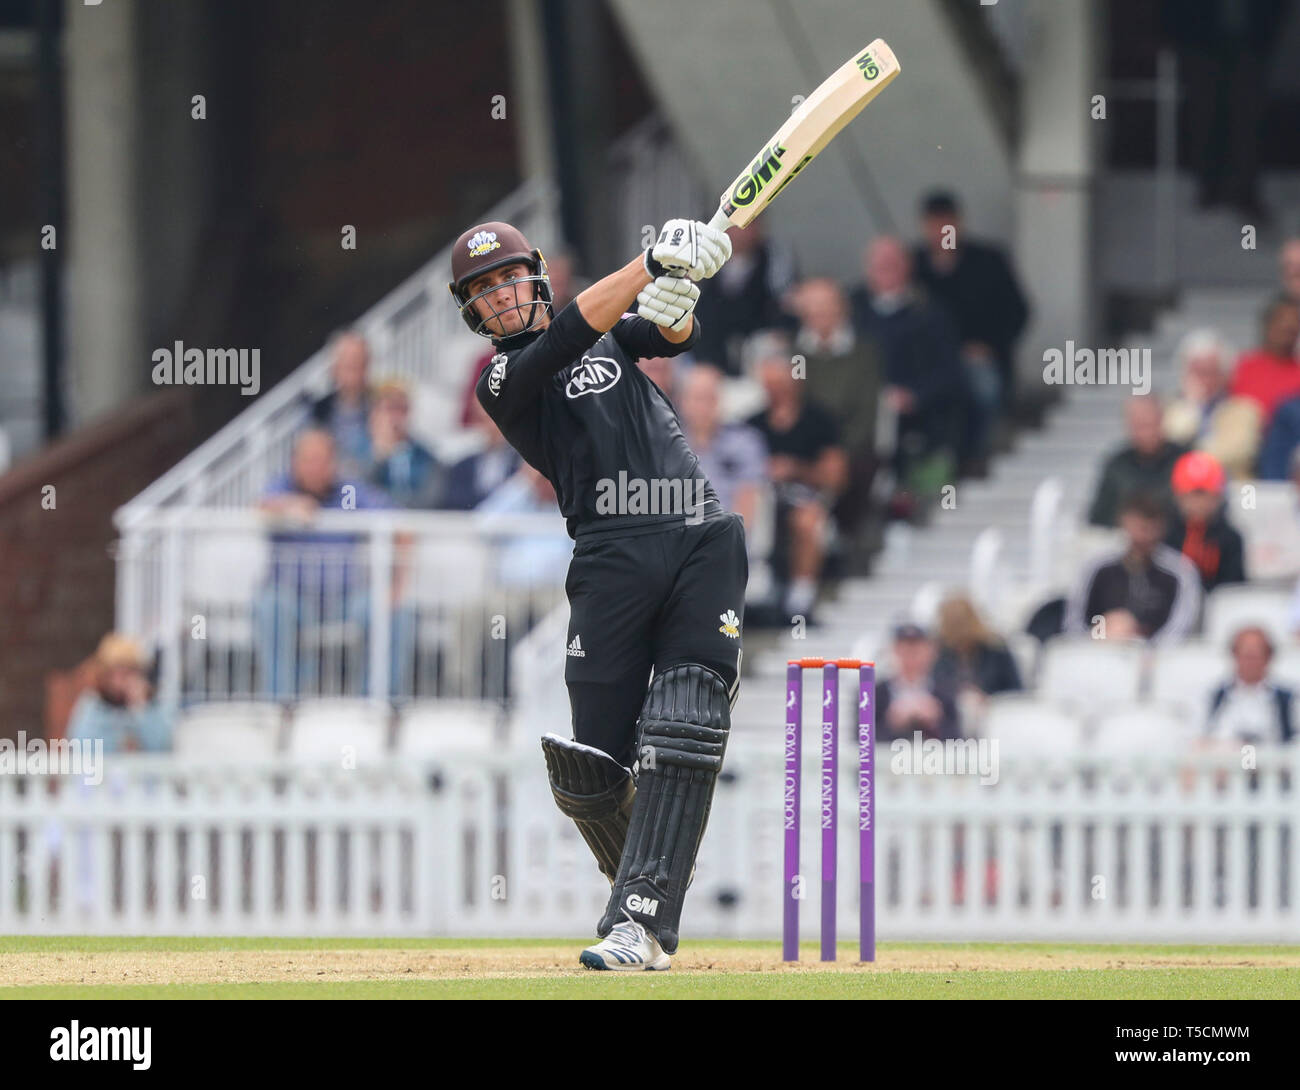 LONDON, UK. 23 April 2019: Will Jacks of of Surrey plays a shot and is caught out during the Surrey v Essex, Royal London One Day Cup match at The Kia Oval. Credit: Mitchell Gunn/ESPA-Images Stock Photo